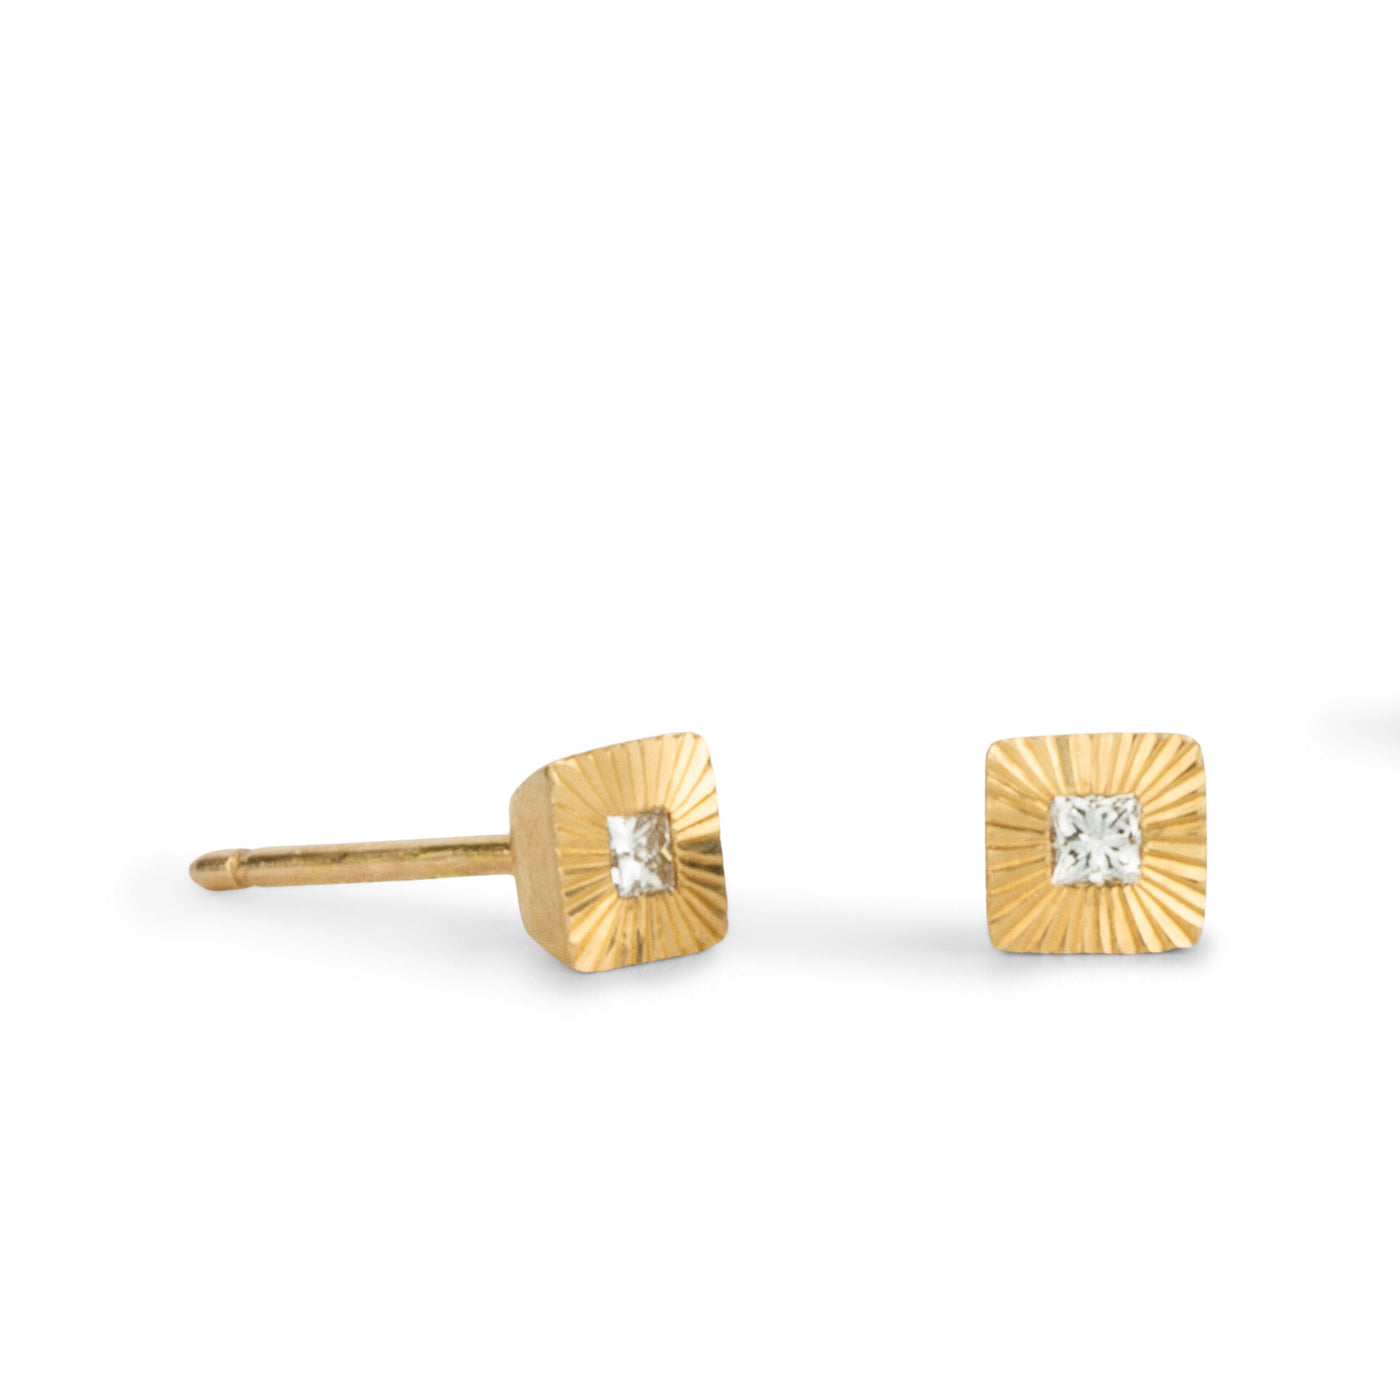 Square 14k yellow gold Aurora stud earrings with princess cut diamond centers and engraved rays side view on a white background